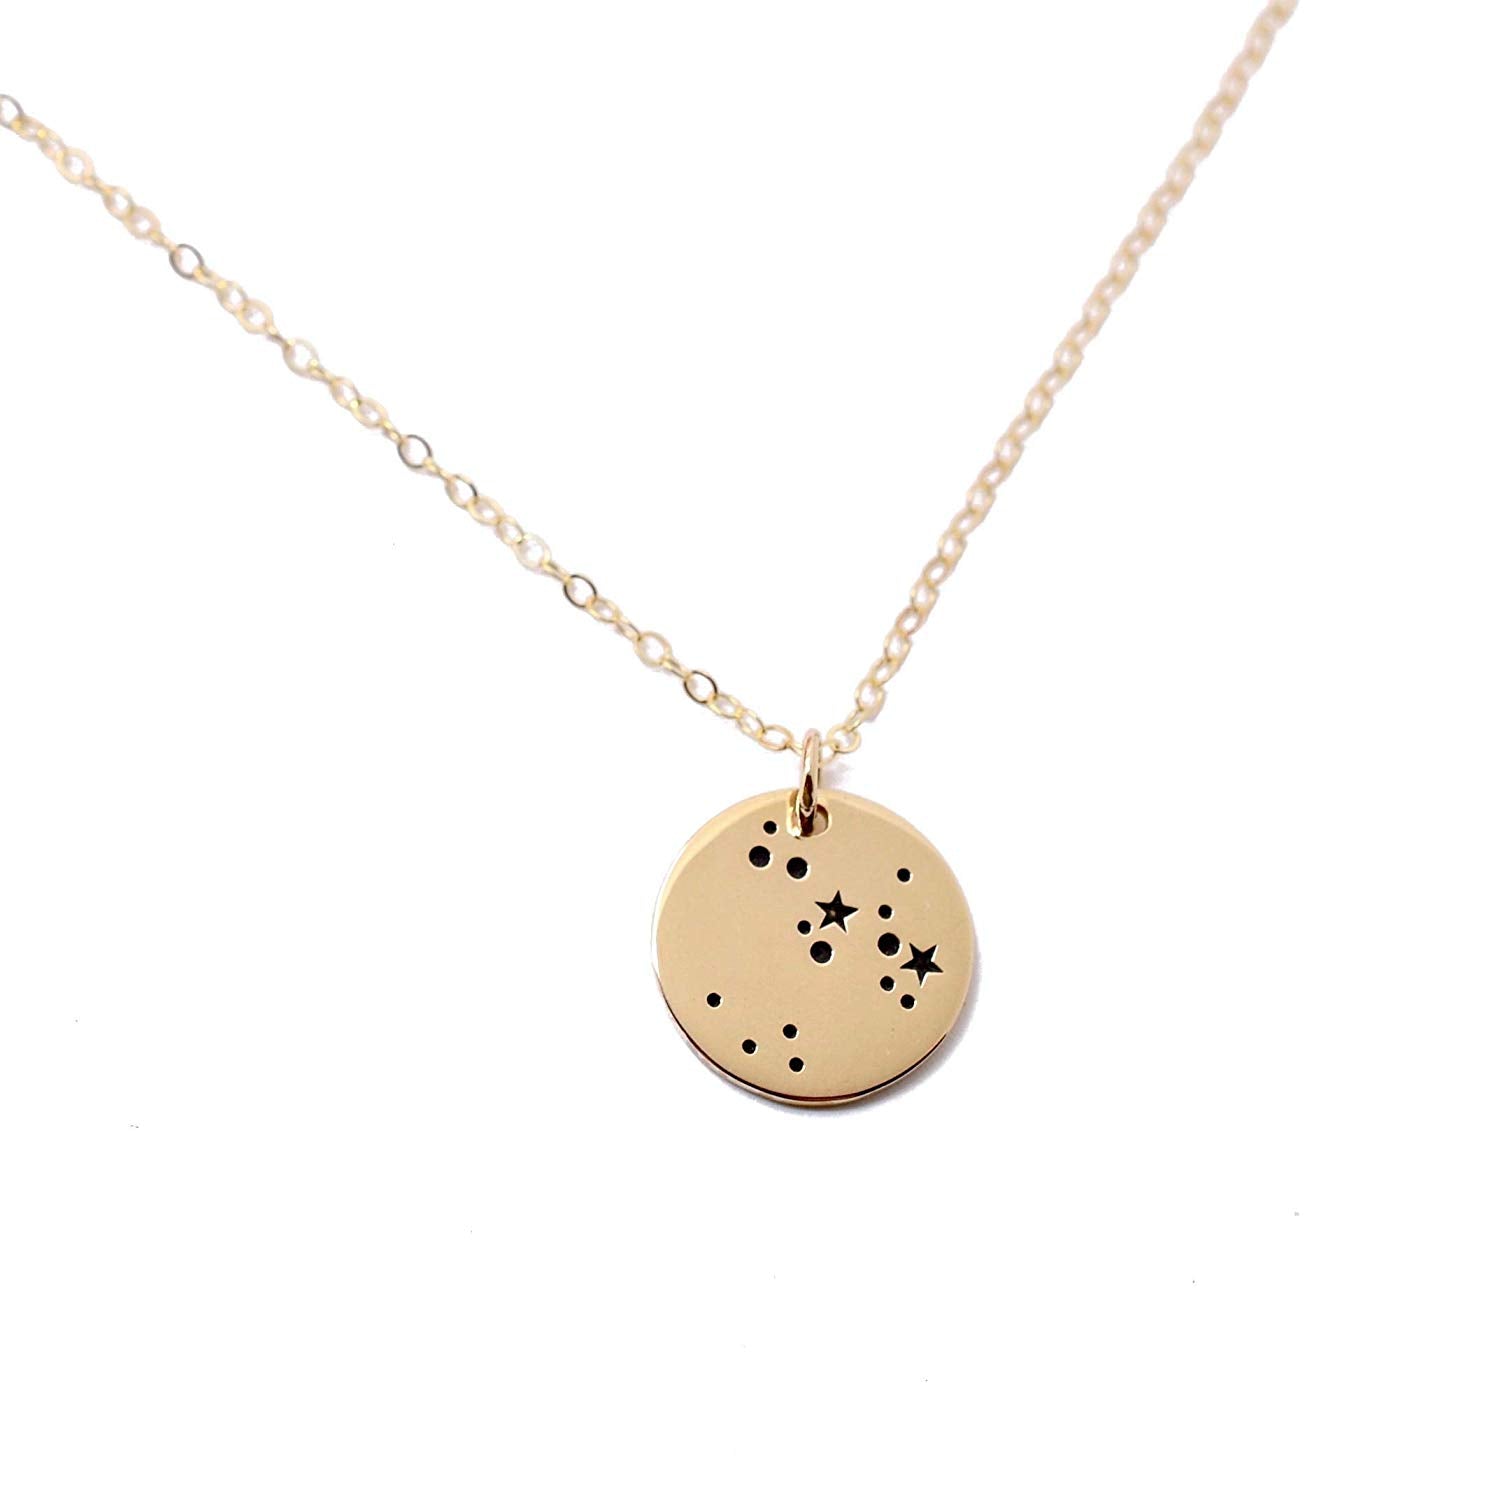 Sagittarius Zodiac Sign 14K Gold Filled Astrology Necklace - Love It Personalized